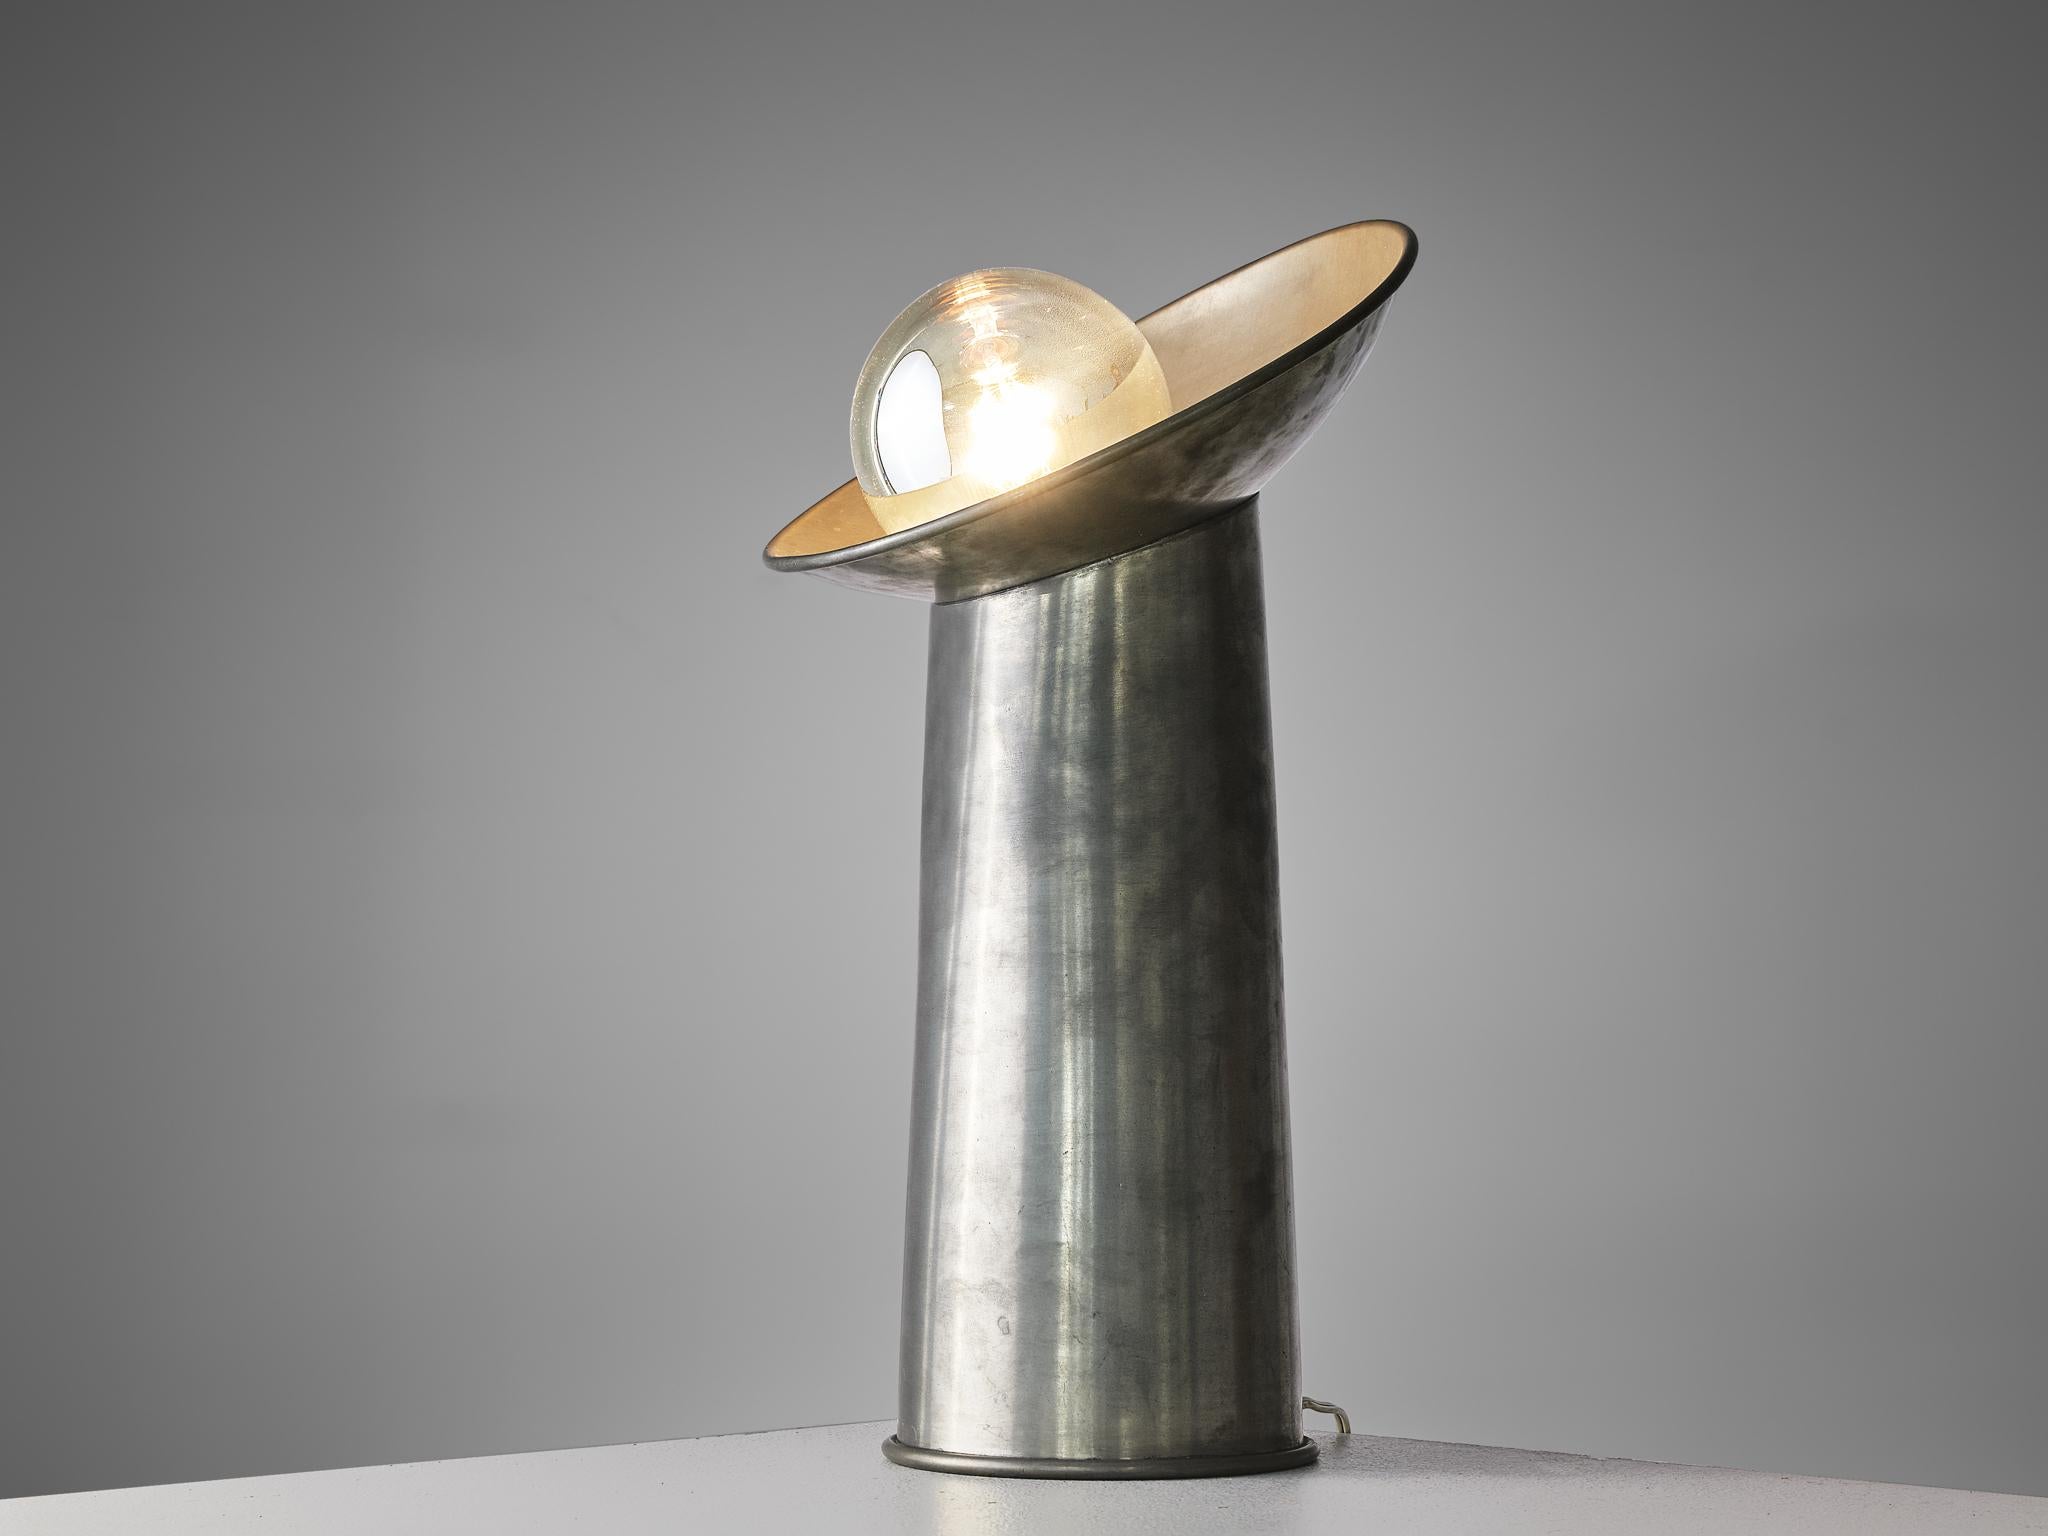 Gjilla Giani for Sormani, 'Radar' table lamp, pewter and glass, Italy, 1970s

A futuristic table lamp designed by the architect Gjilla Giani for Sormani. The lamp is completely executed in pewter. The shade on a round base is faced up, holding a